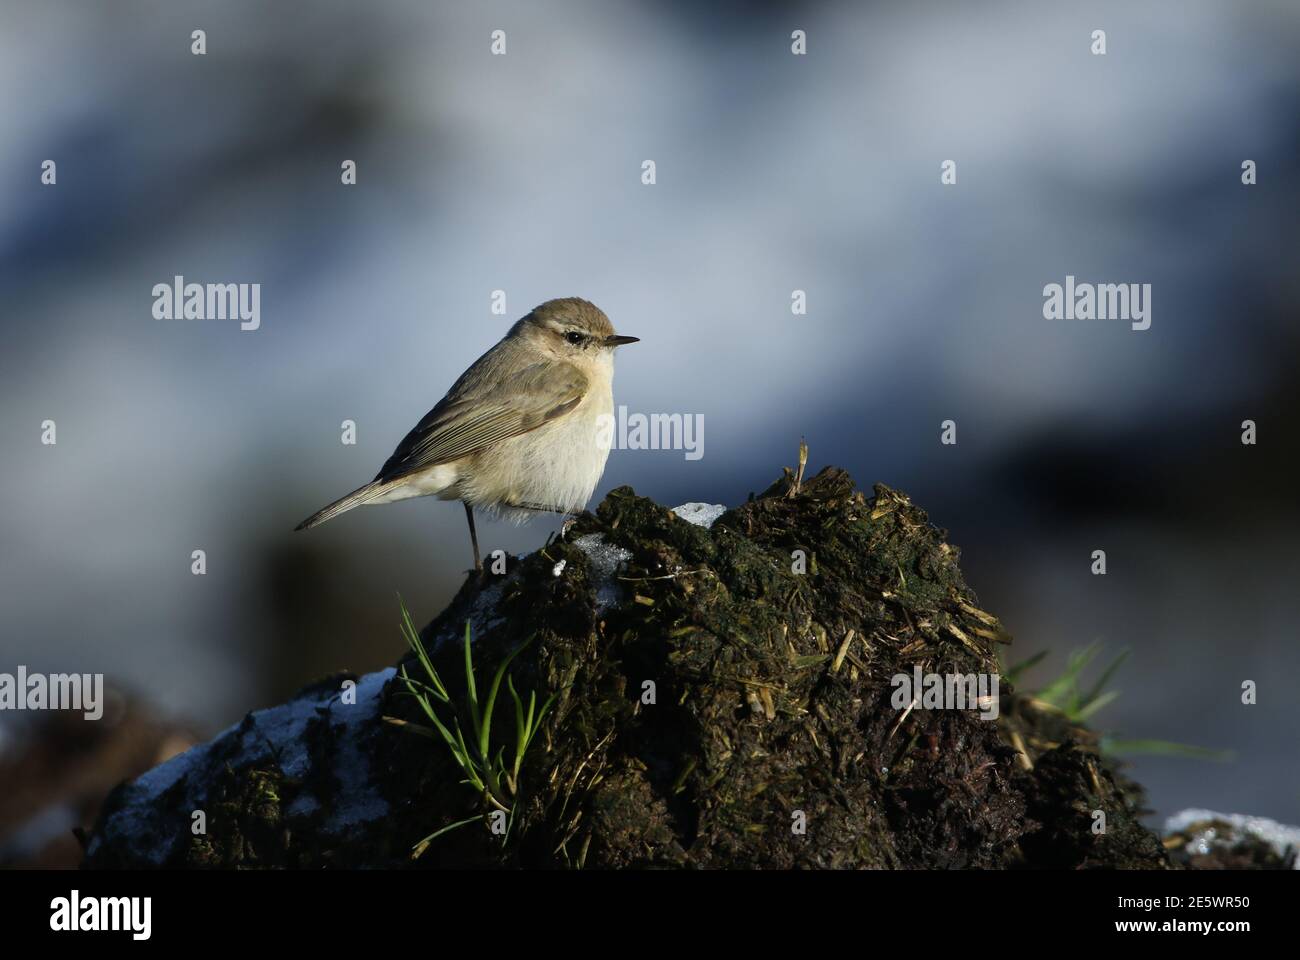 A rare Siberian Chiffchaff, Phylloscopus collybita tristis, searching for insects on a dung heap amongst the snow and manure in winter. Stock Photo